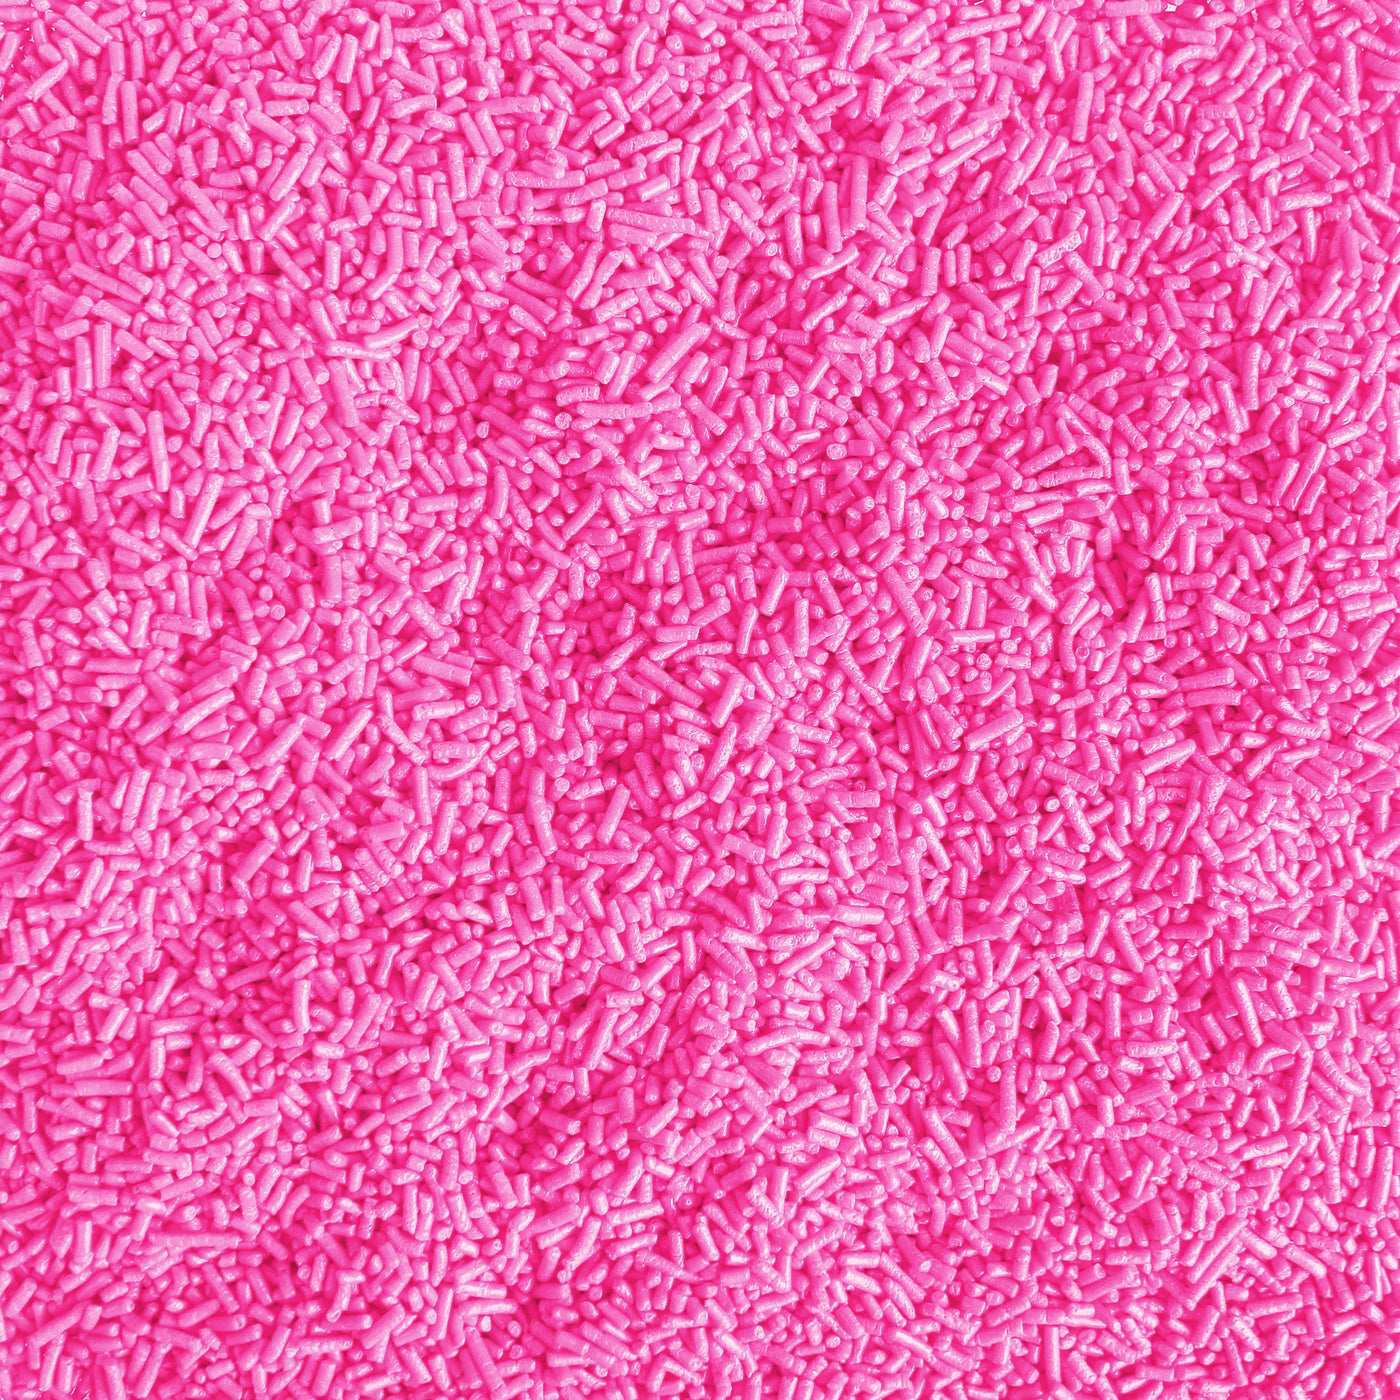 Hot pink sprinkles for decorating cakes cupcakes cookies and other baked goods